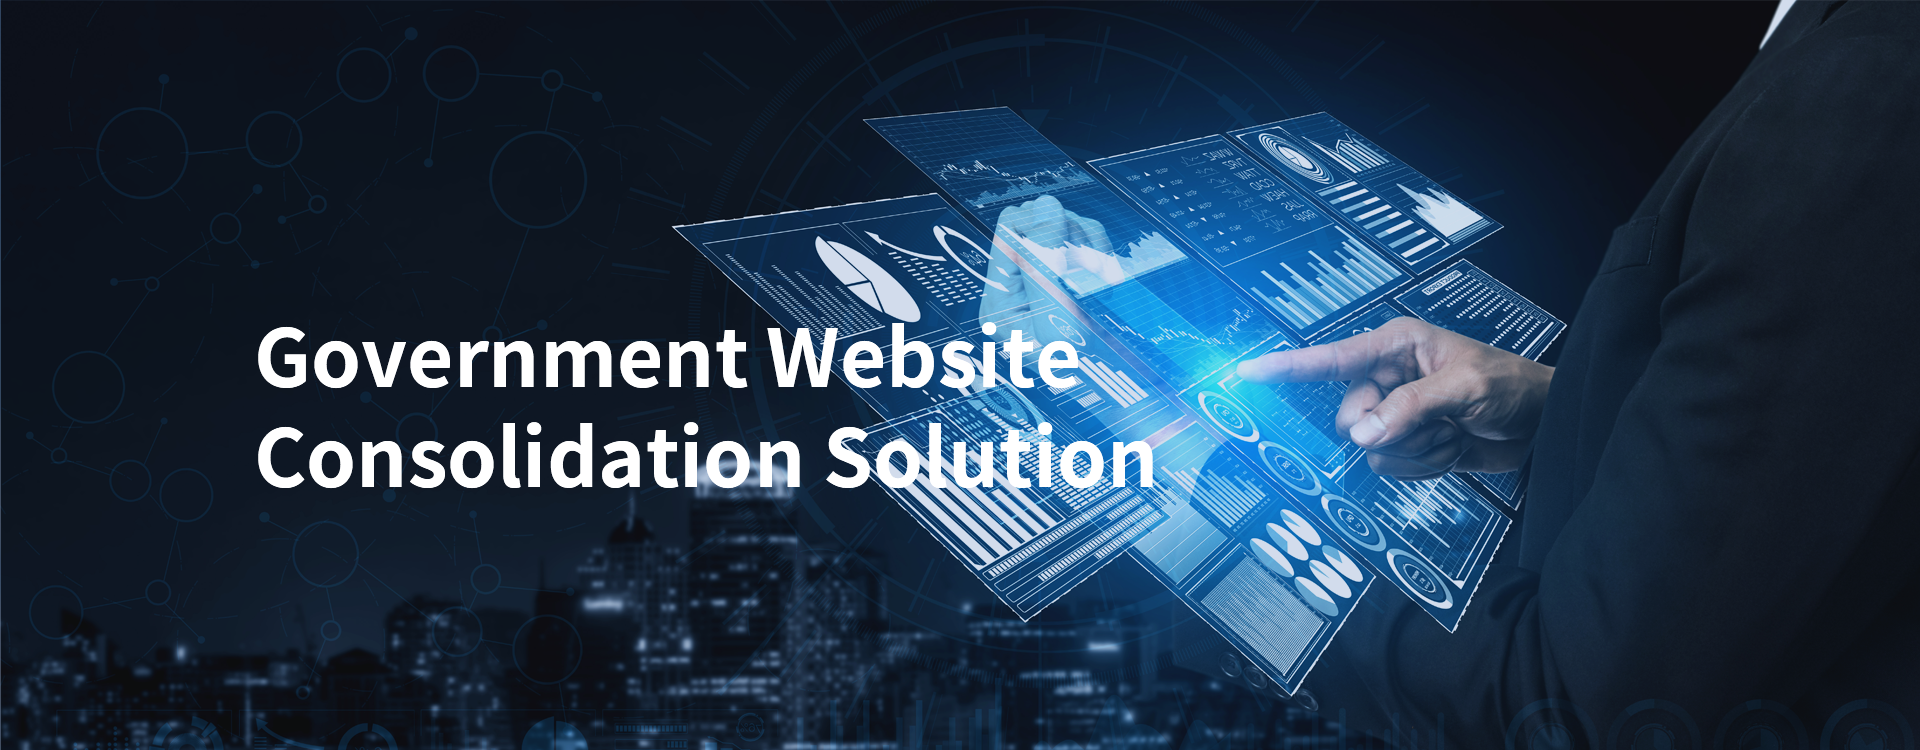 Government Website Consolidation